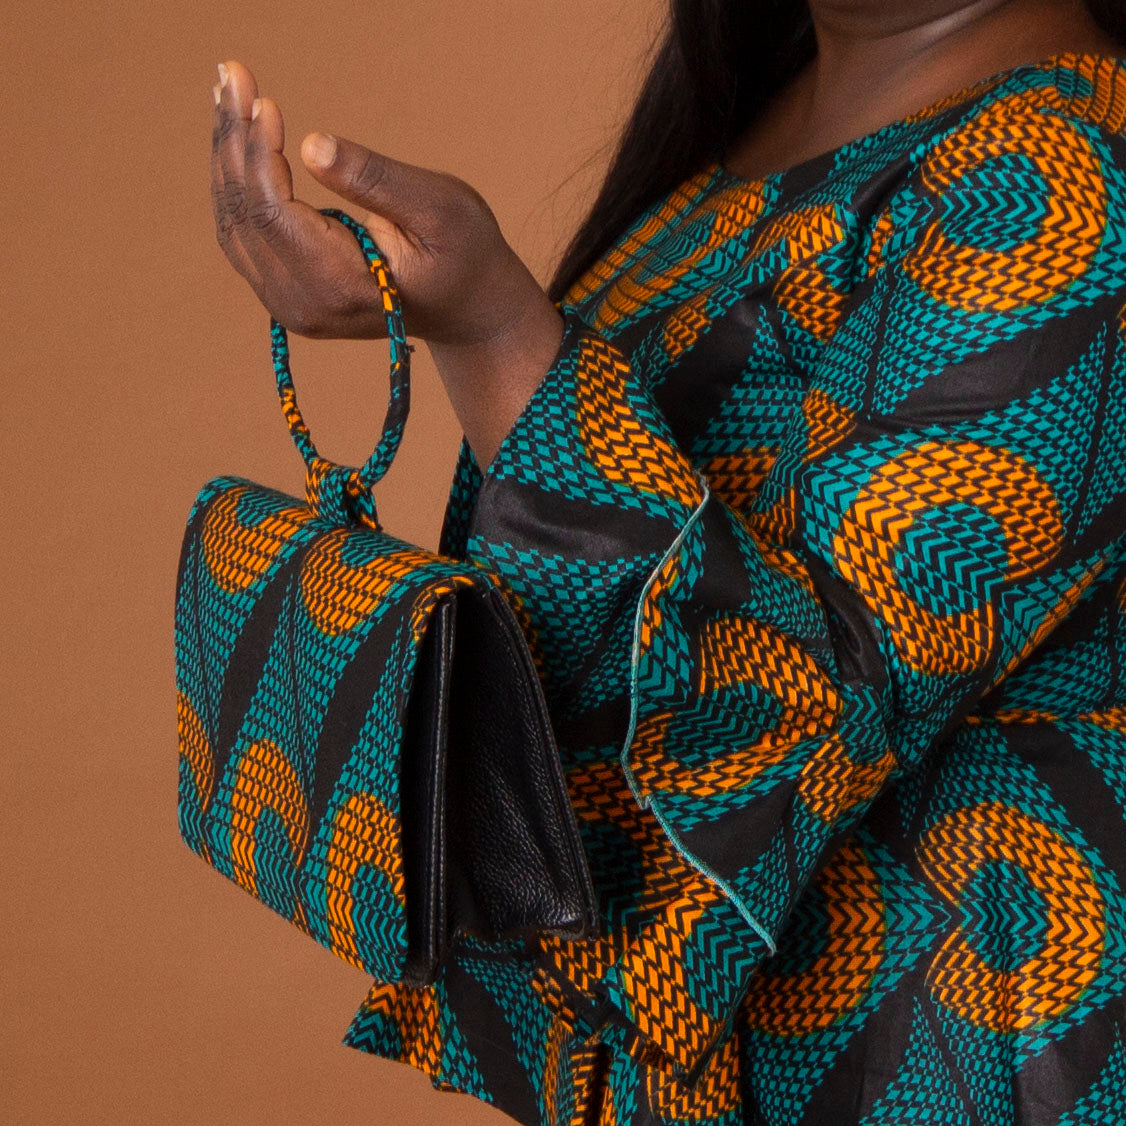  Leather bag with ring shaped handle, velvet lined interior and a geometic orange and green African Print overlay